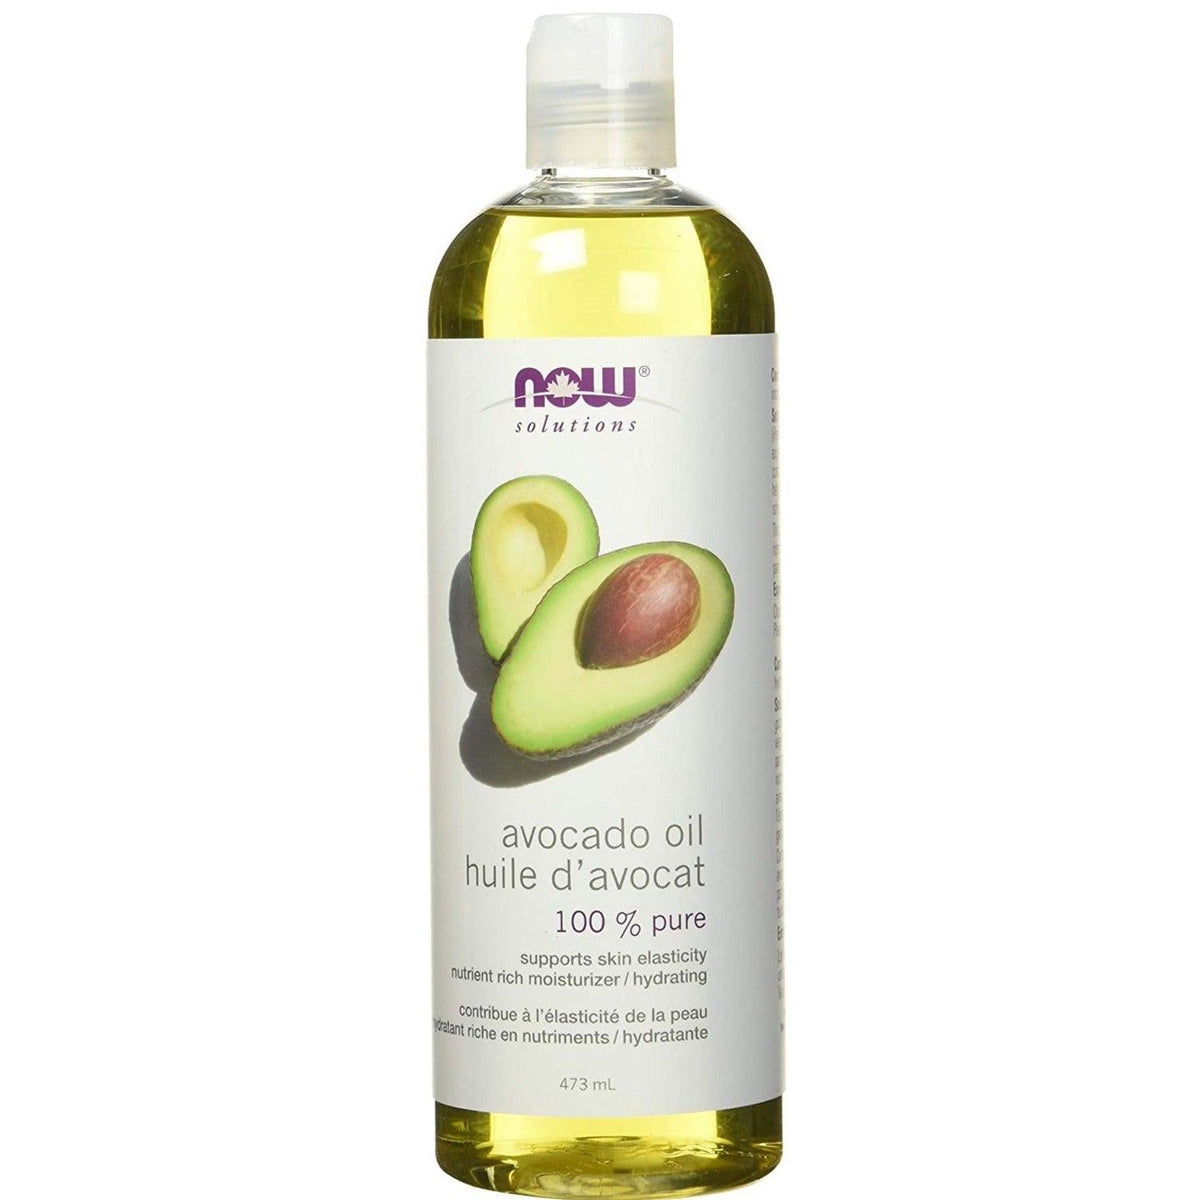 NOW Solutions Avocado Oil 473ML Beauty Oils at Village Vitamin Store